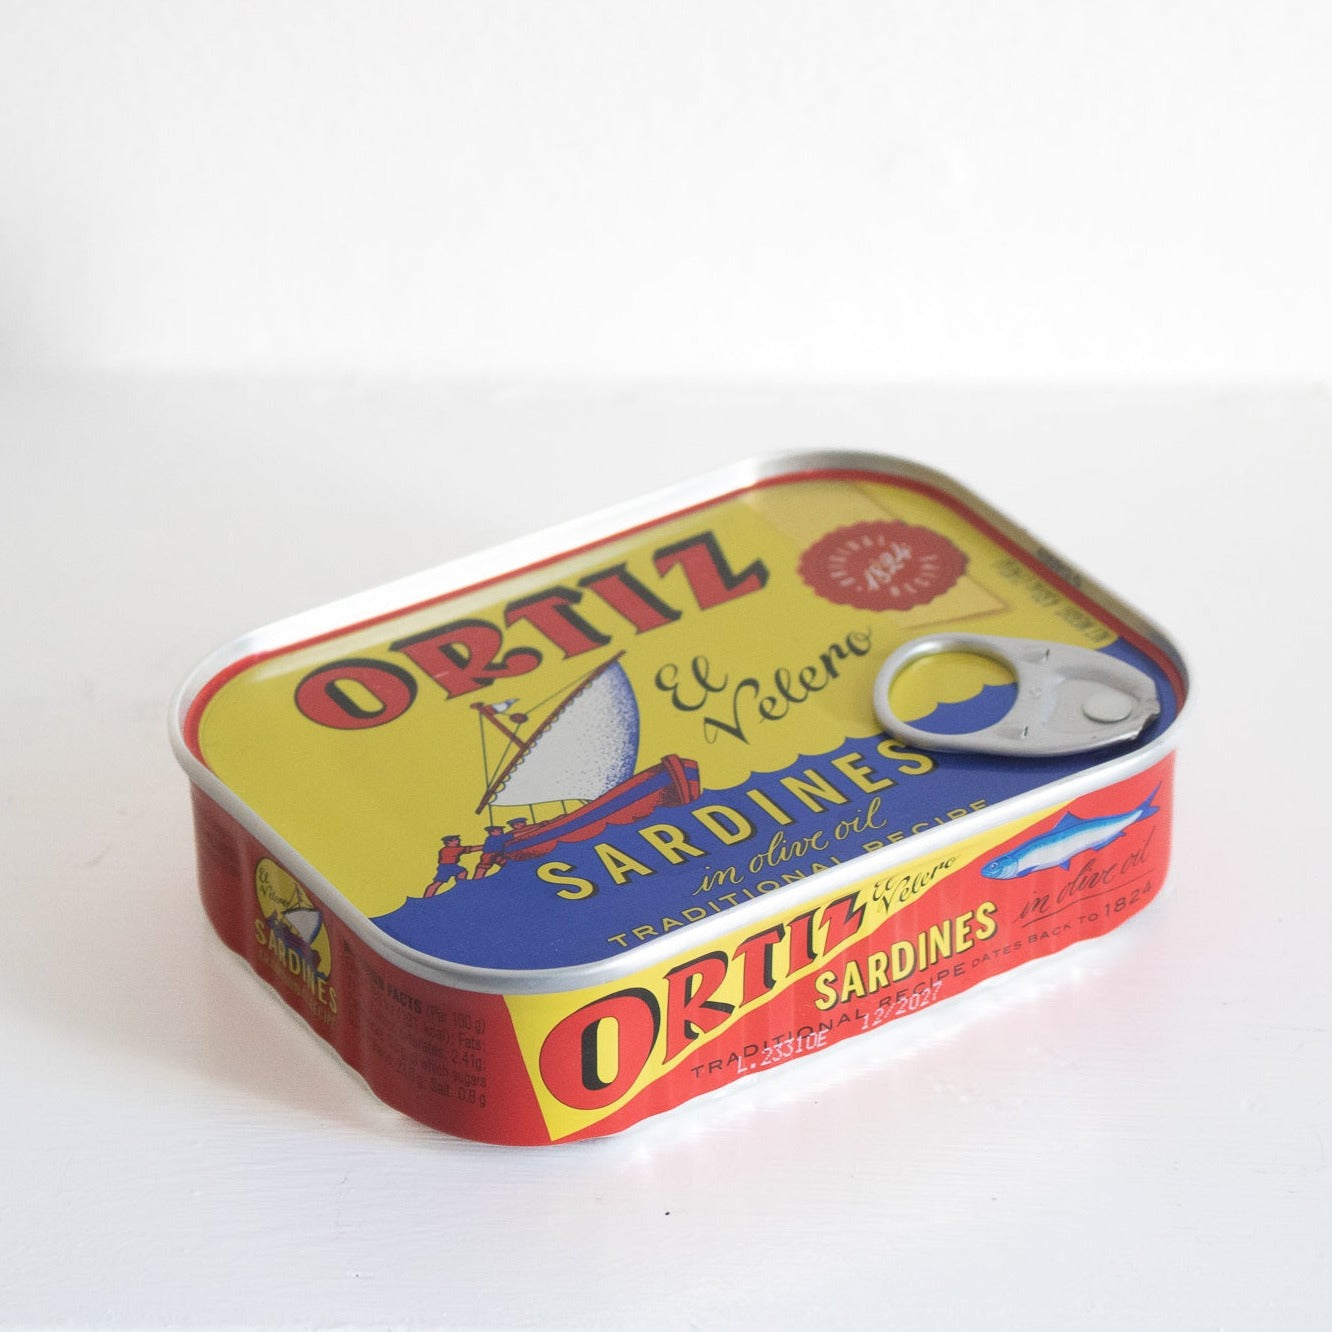 Image of a tin of sardines. the tin is yellow and blue with red and yellow writing. it also has a picture of a boat on it. 